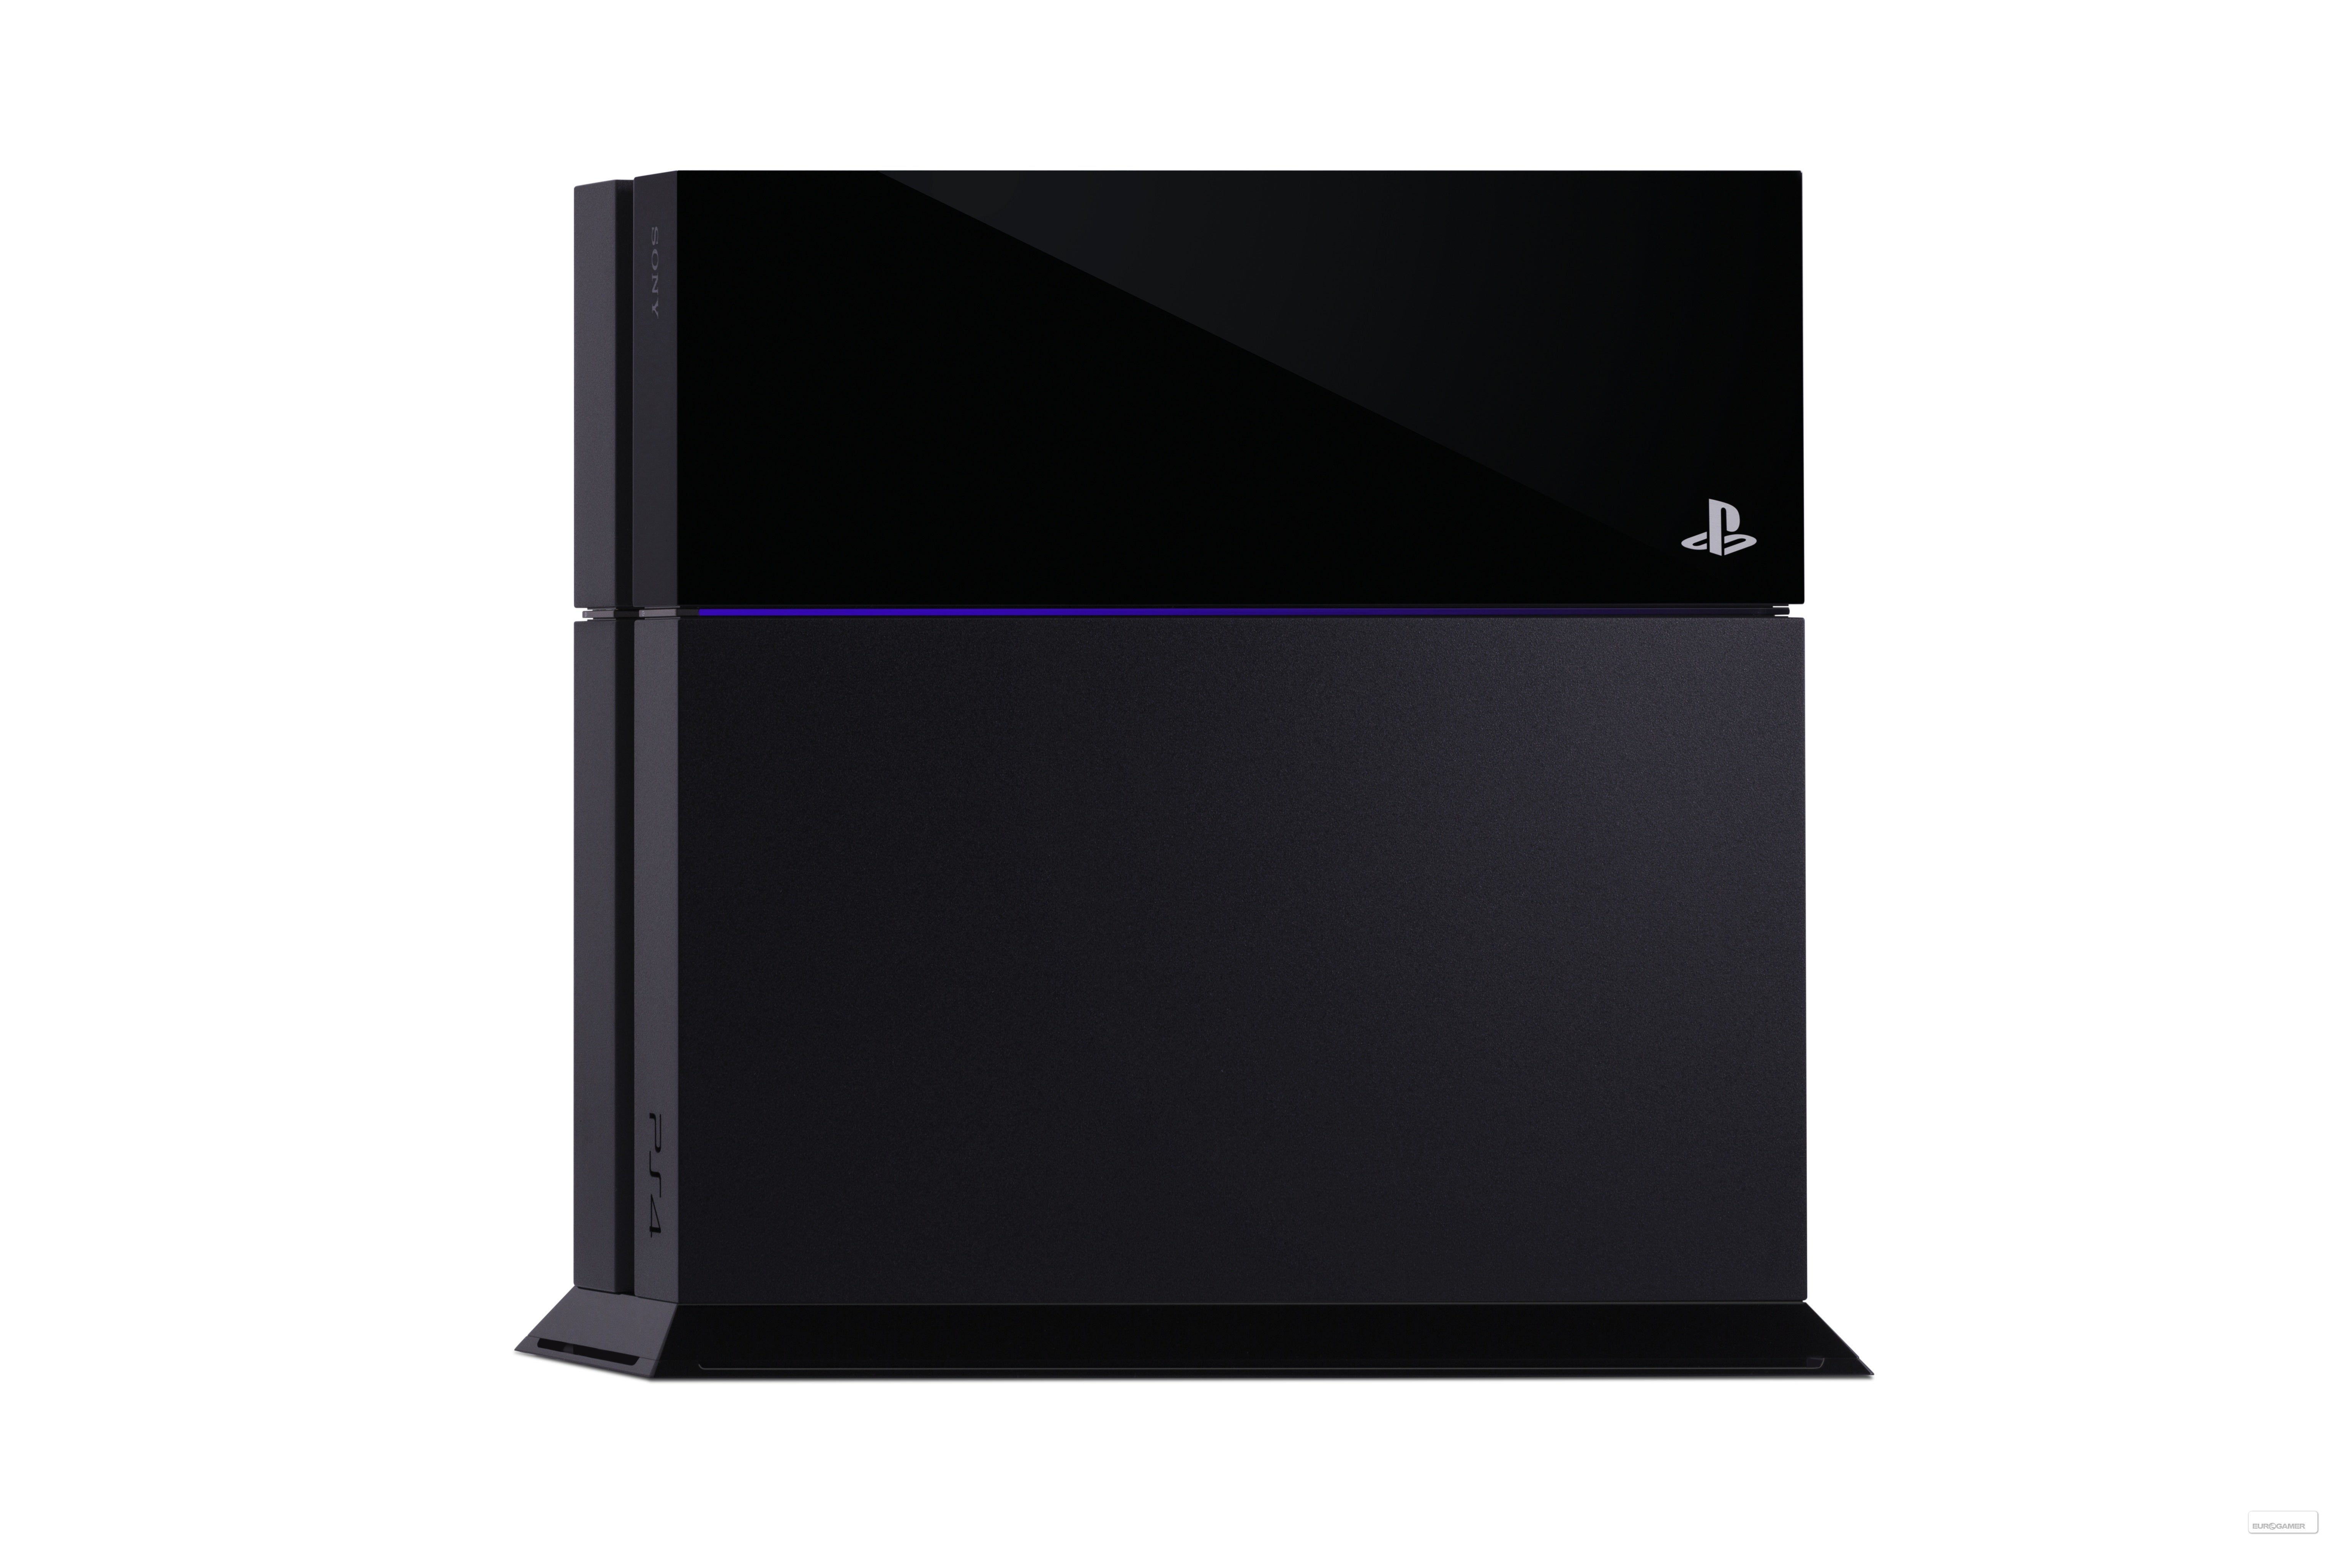 Ps4 live. PLAYSTATION 4. PLAYSTATION ps4. Подставка 4 пс4. Vertical Stand для Sony ps4.